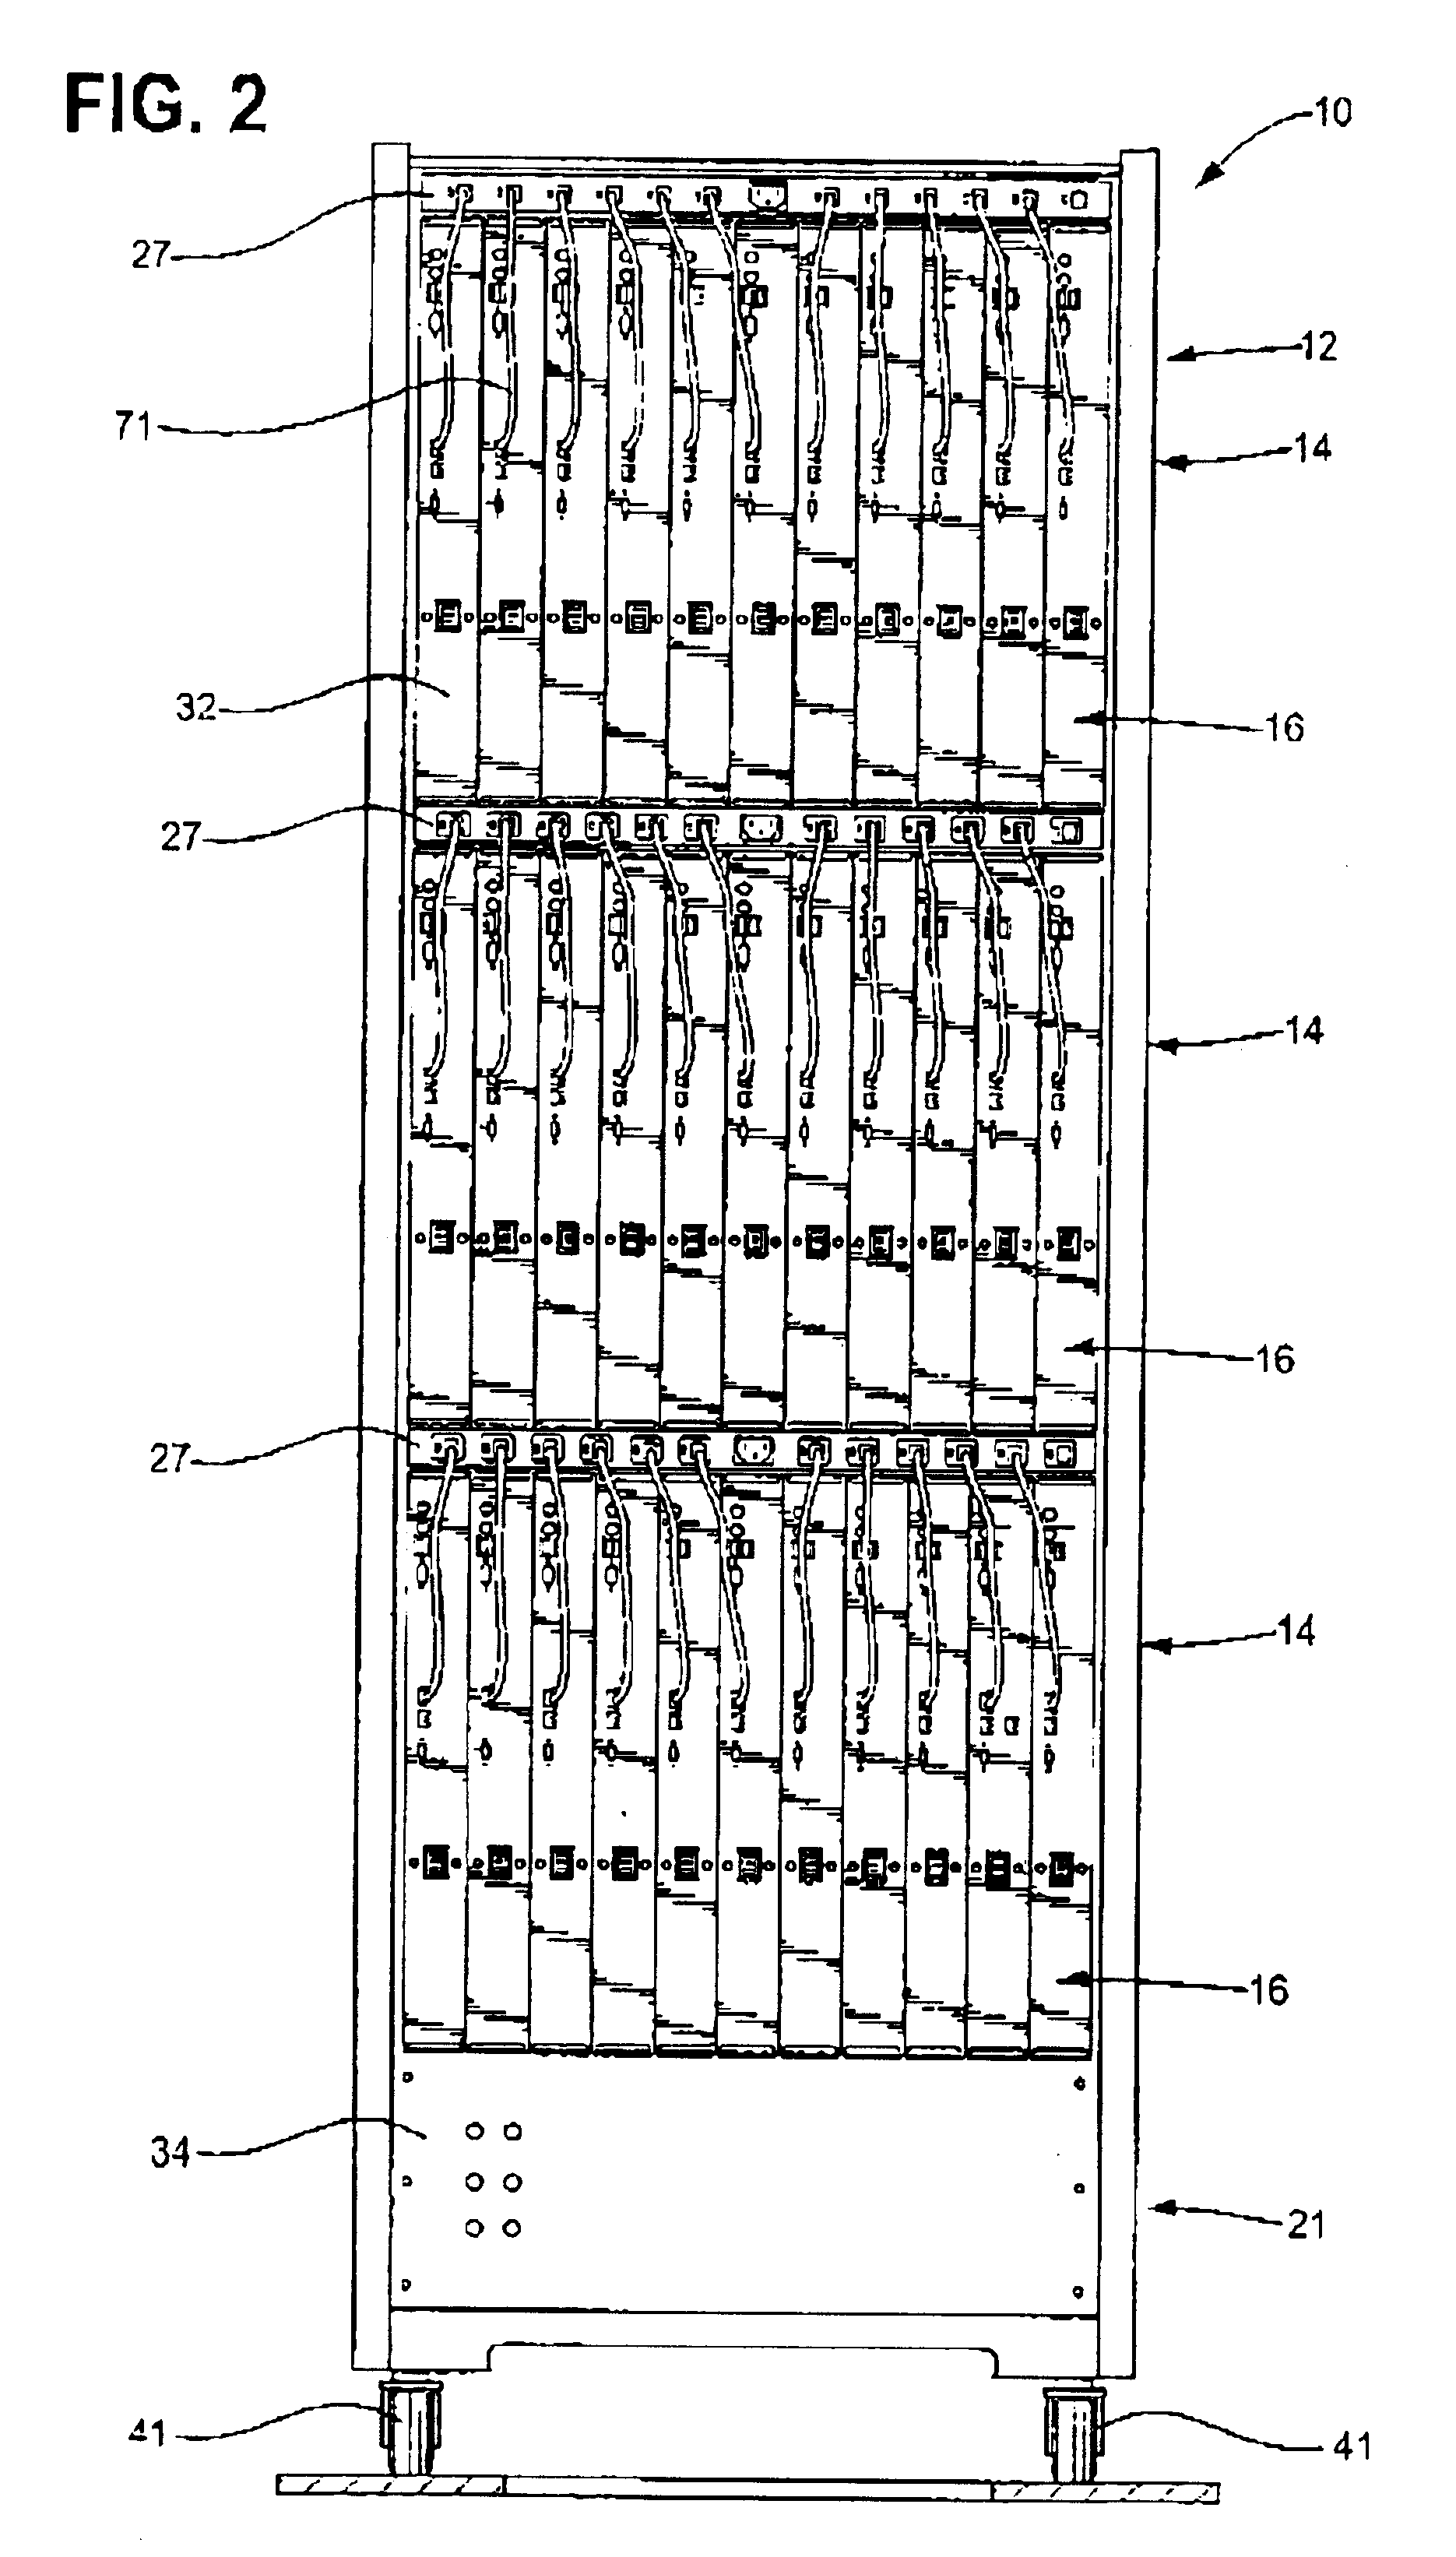 Method and apparatus for rack mounting computer components